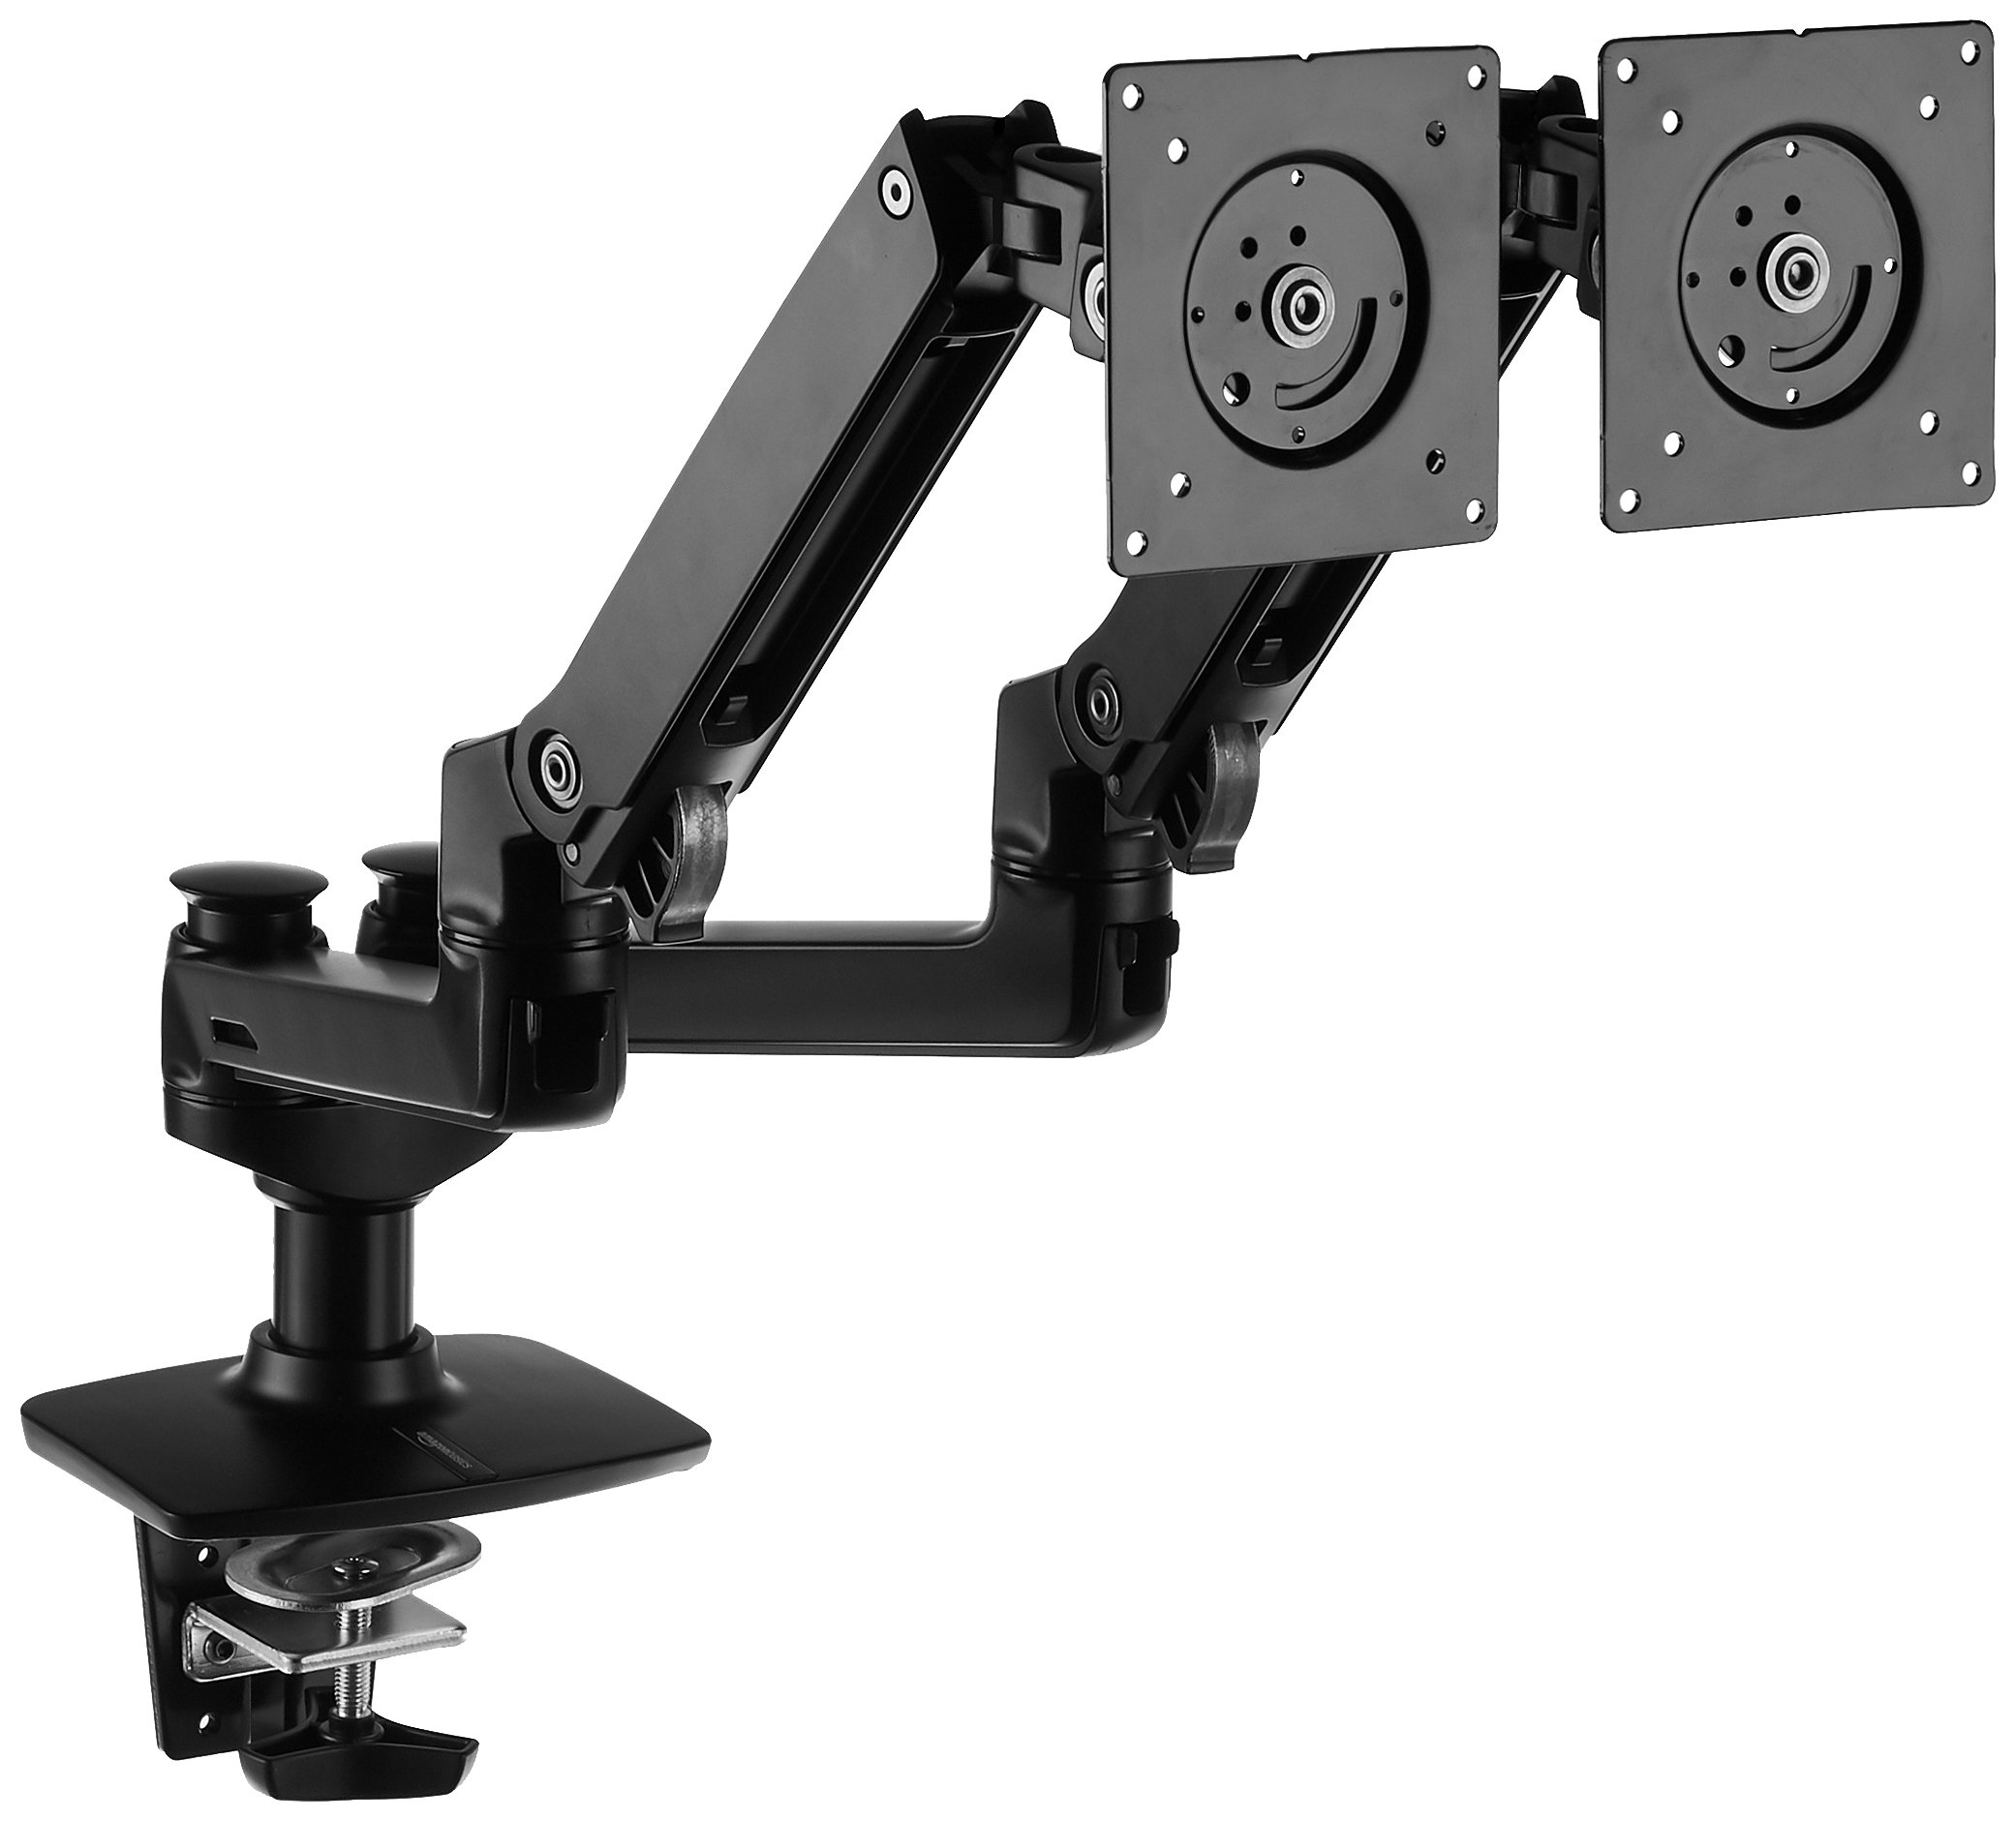 Book Cover Amazon Basics Dual Monitor Stand, Lift Engine Arm Mount, Black